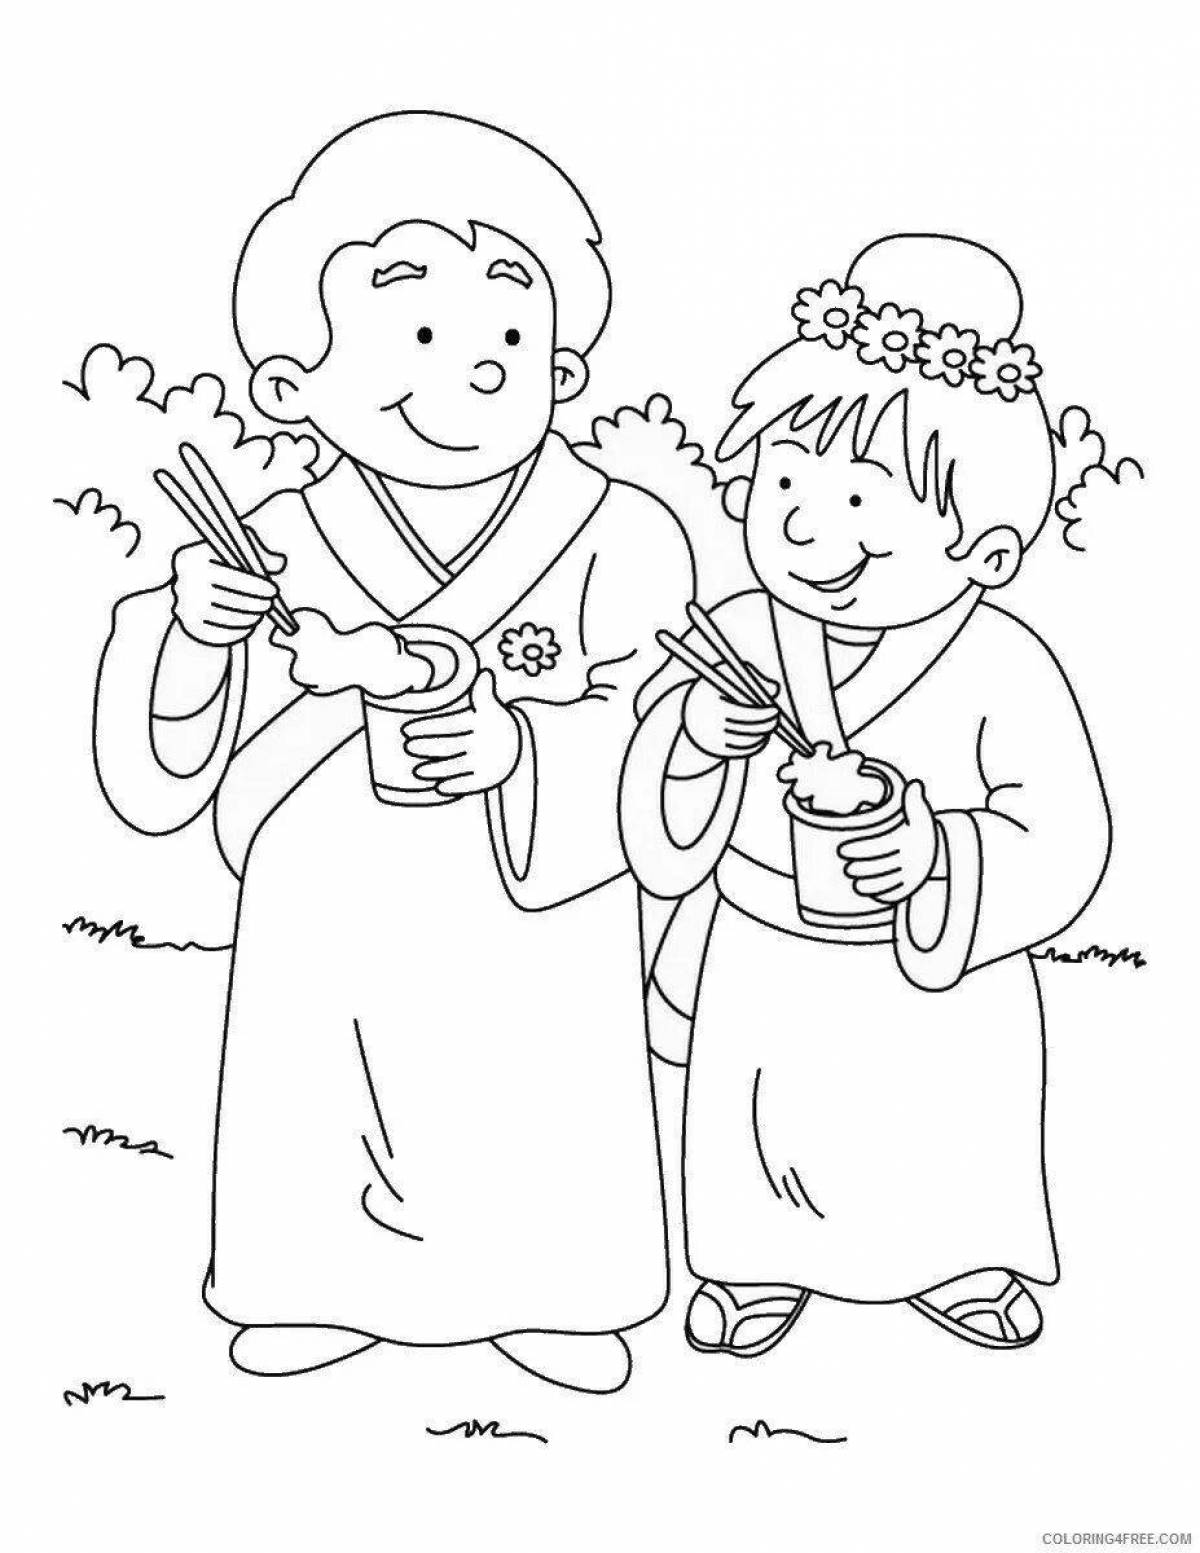 Crazy Chinese New Year coloring pages for kids